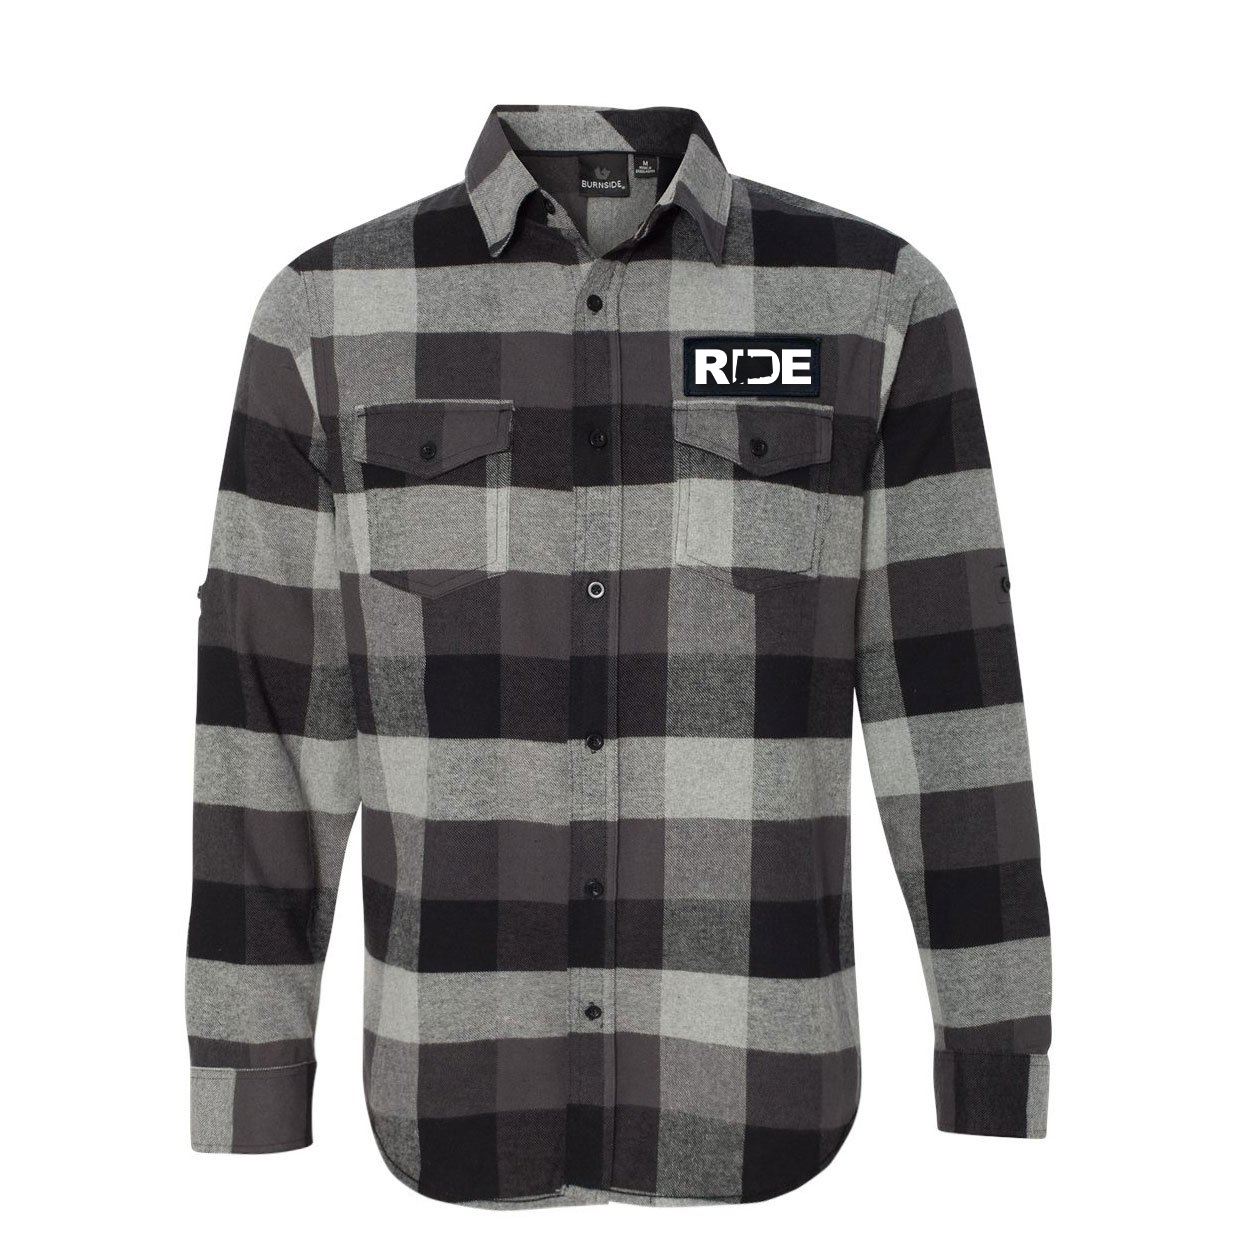 Ride Connecticut Classic Unisex Long Sleeve Woven Patch Flannel Shirt Black/Gray (White Logo)